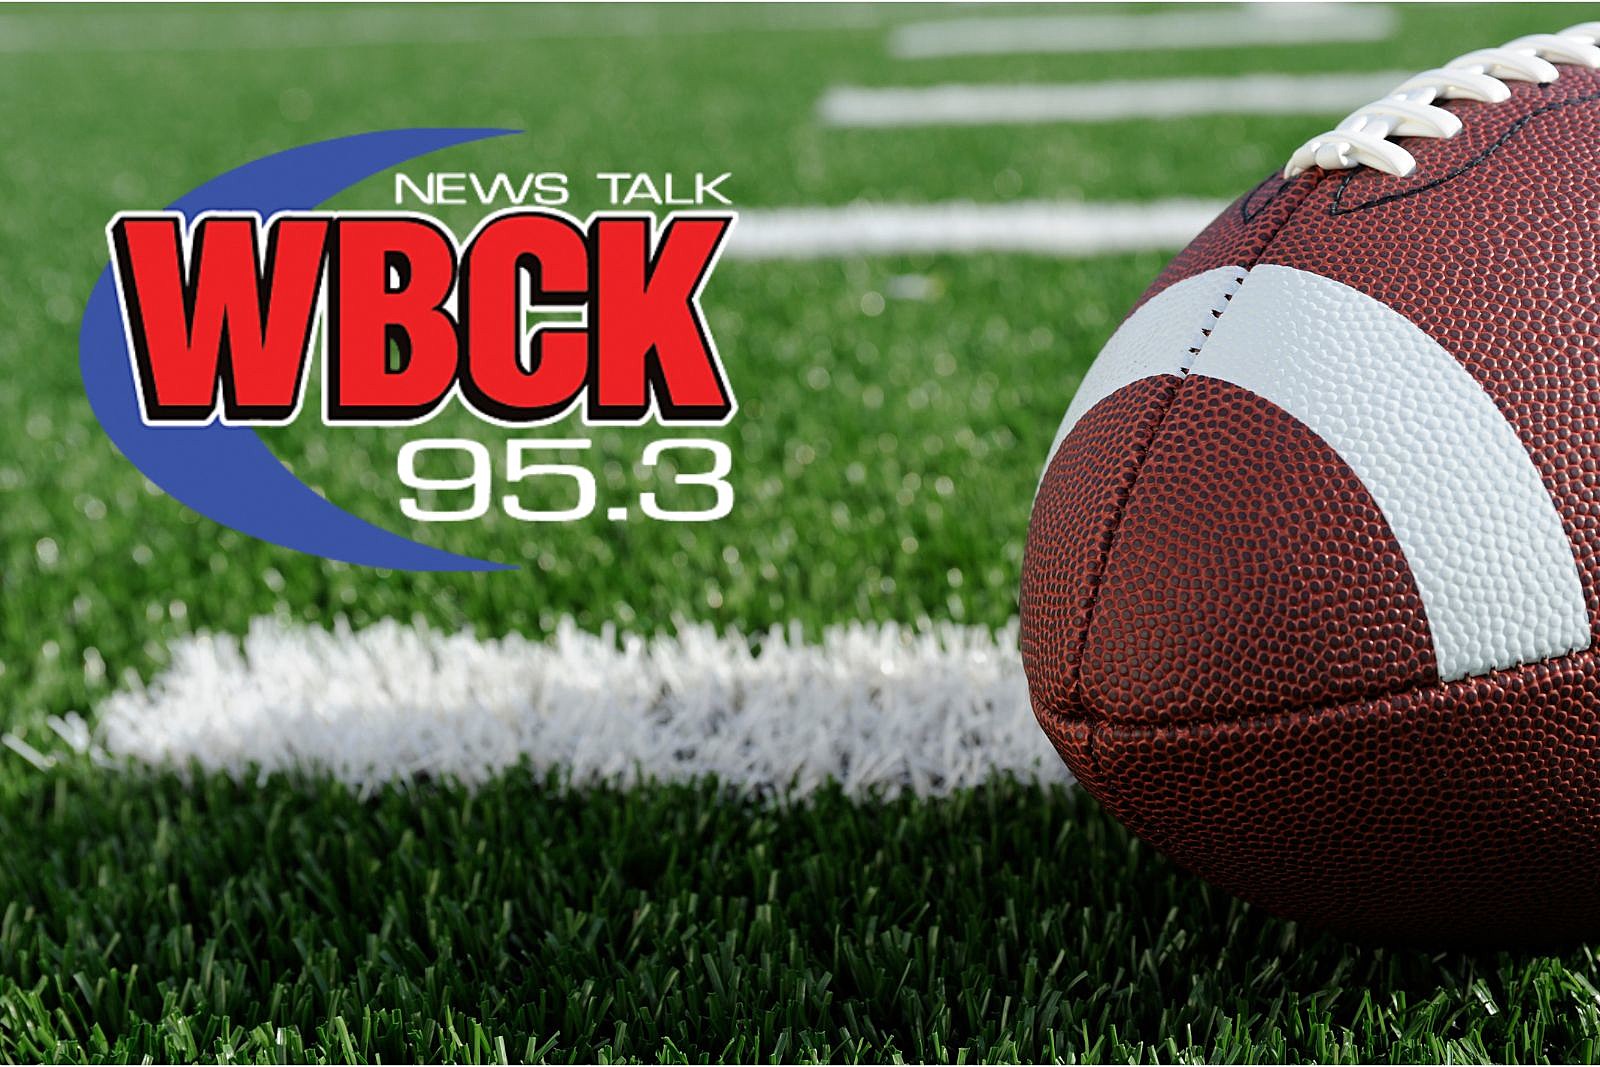 Battle Creek High School Football Play-By-Play Coming to WBCK